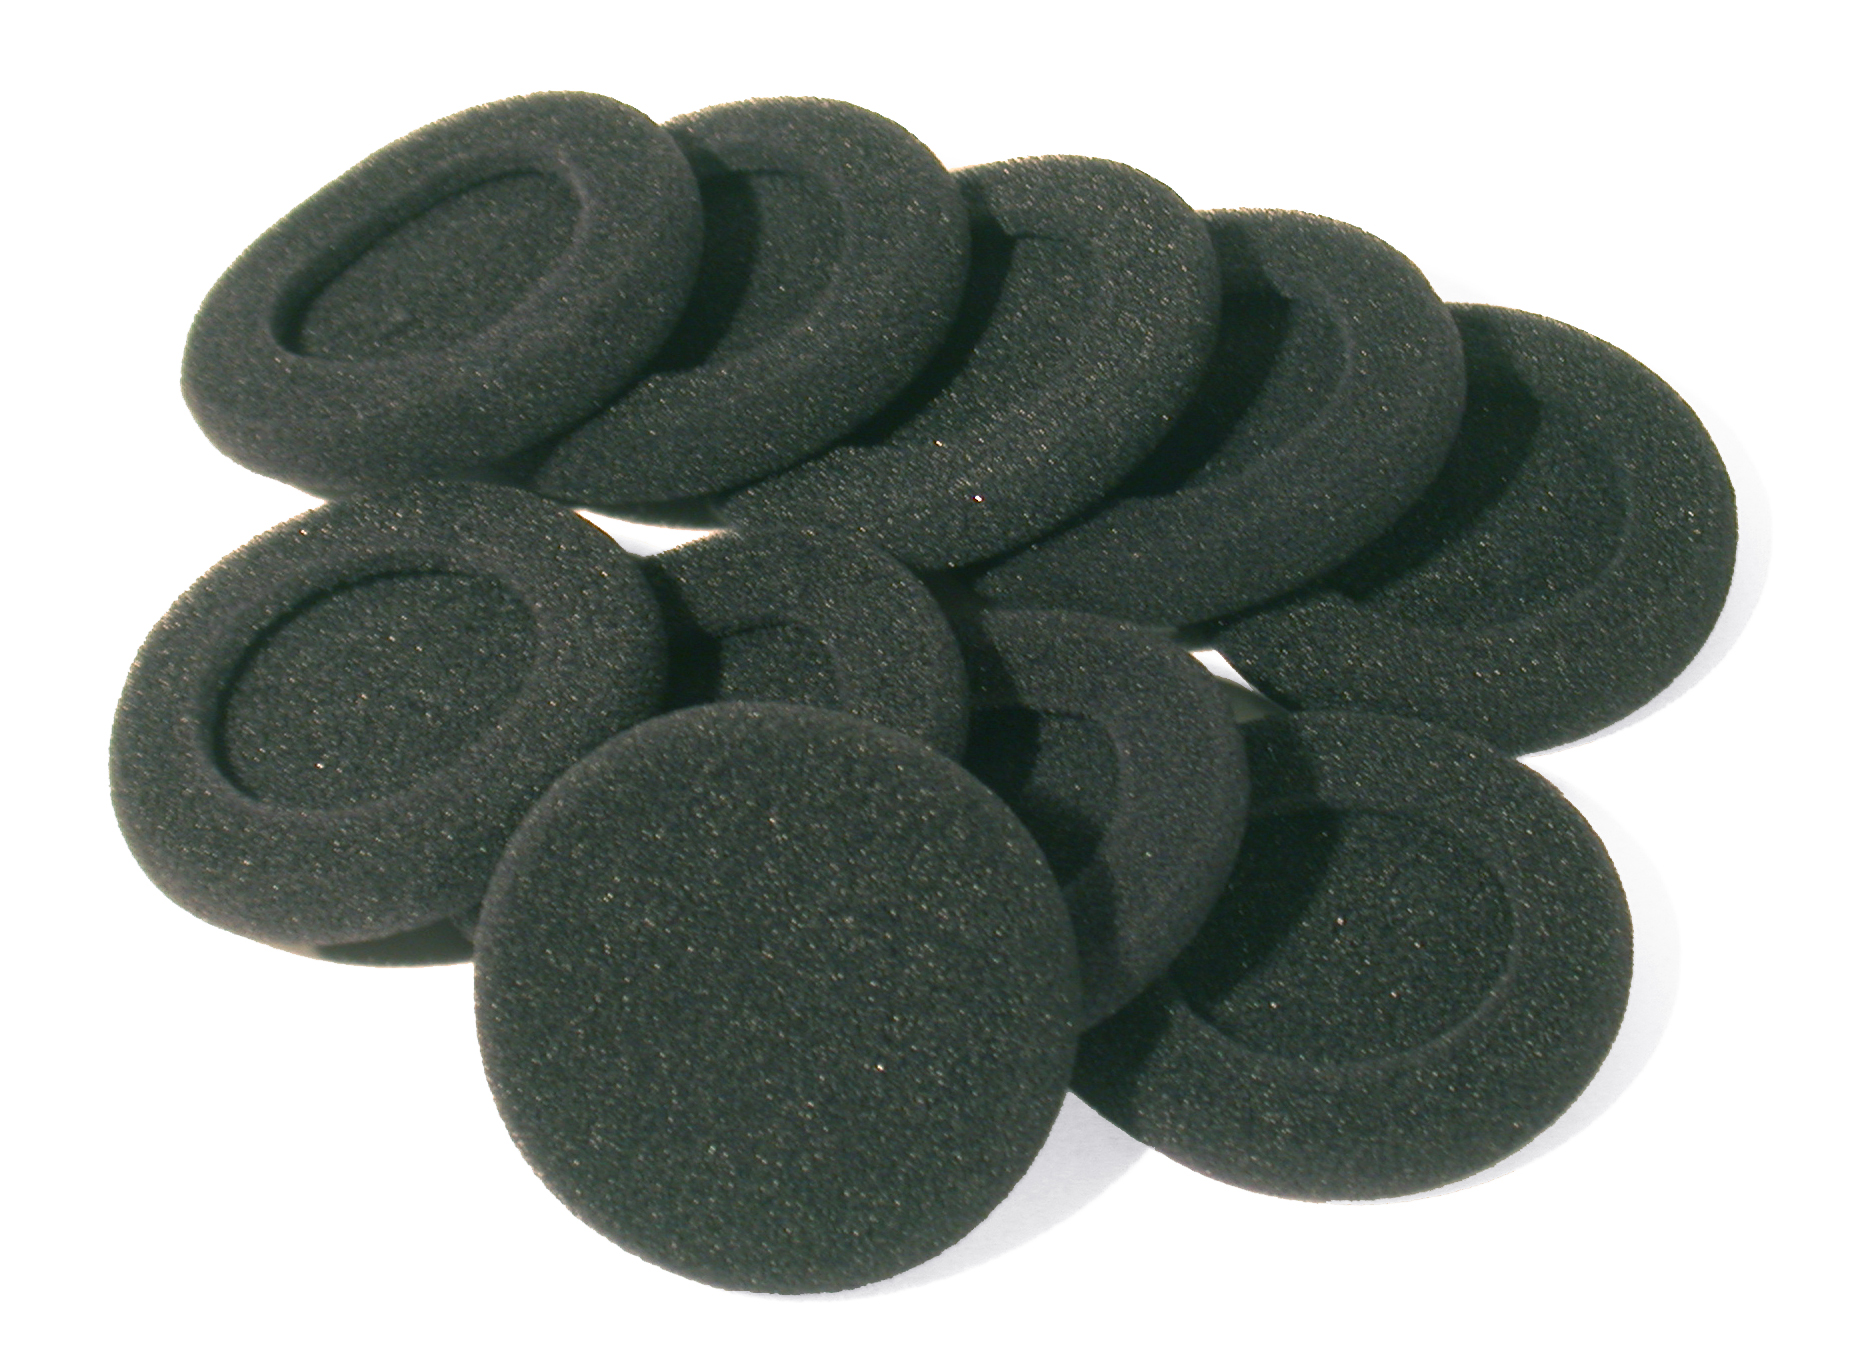 Replacement Cushions for Stereo Headphones (10)